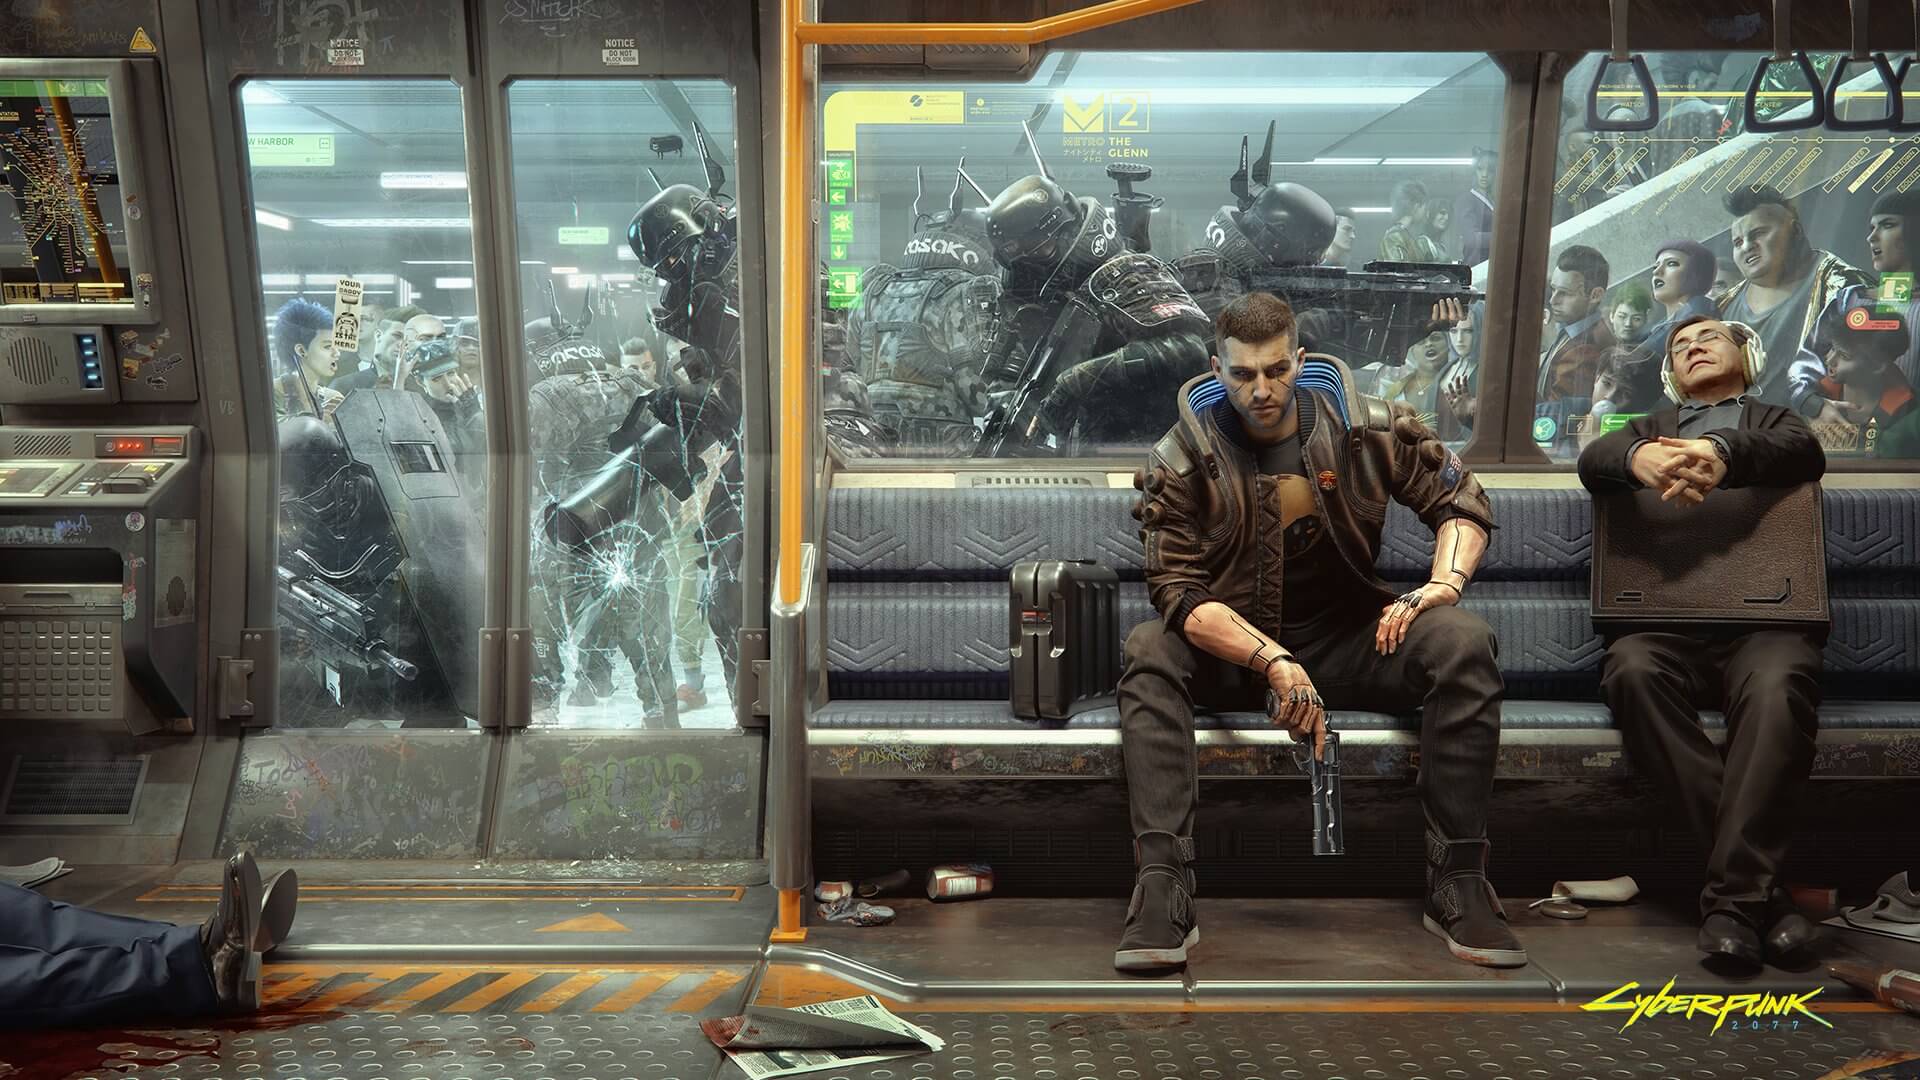 This Cyberpunk 2077 Mod significantly improves its draw distance